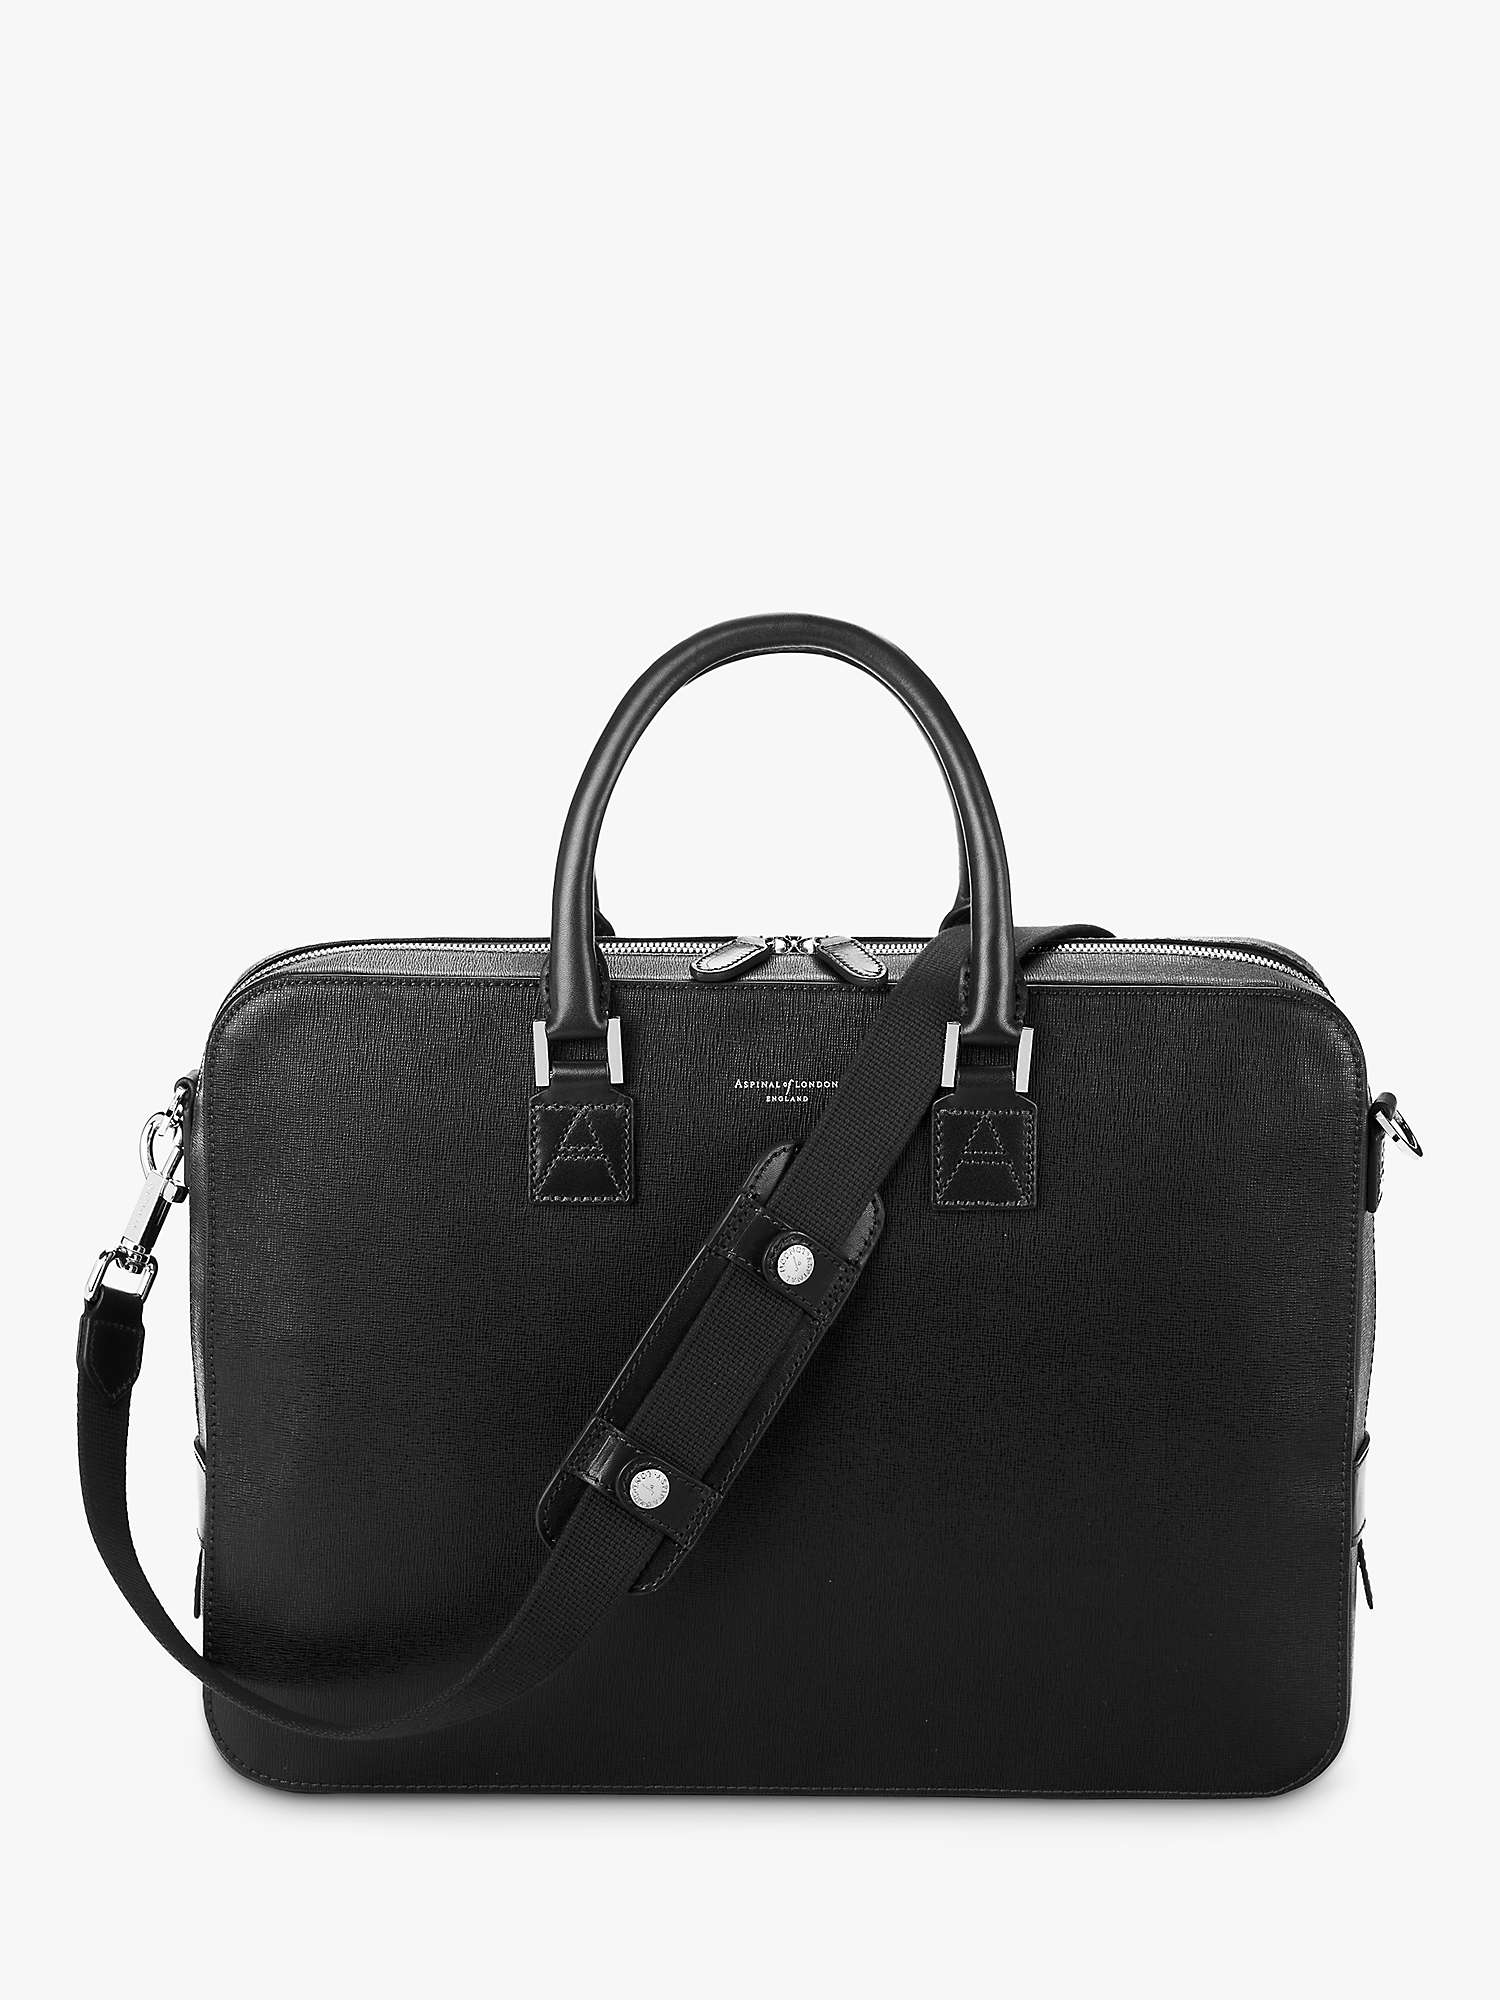 Buy Aspinal of London Mount Street Small Saffiano Leather Laptop Bag Online at johnlewis.com